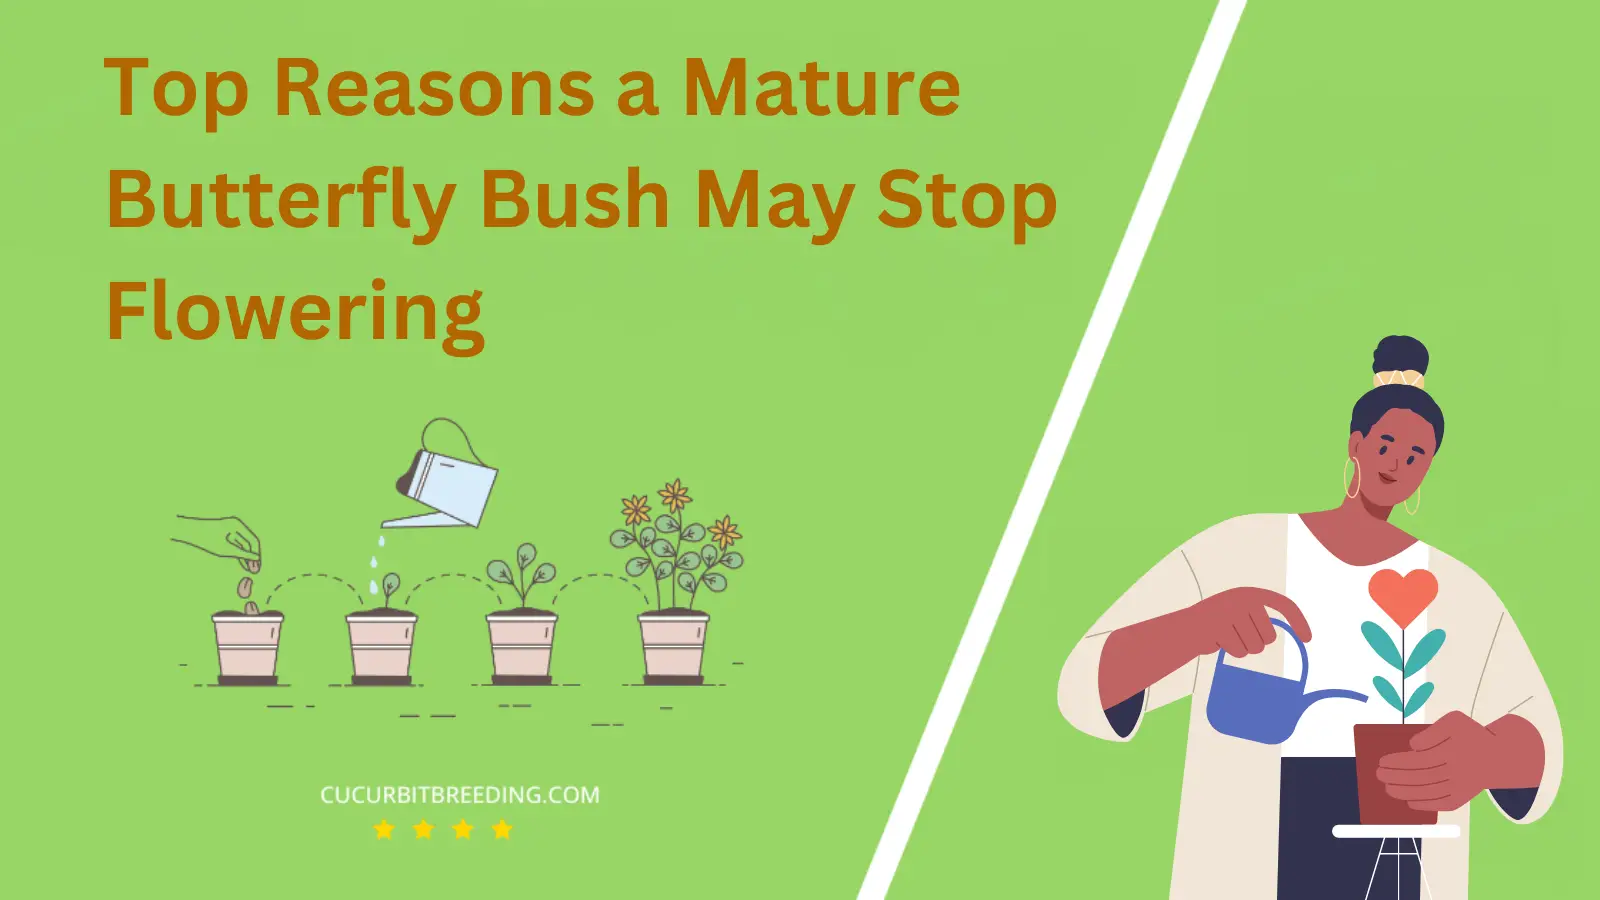 Top Reasons a Mature Butterfly Bush May Stop Flowering